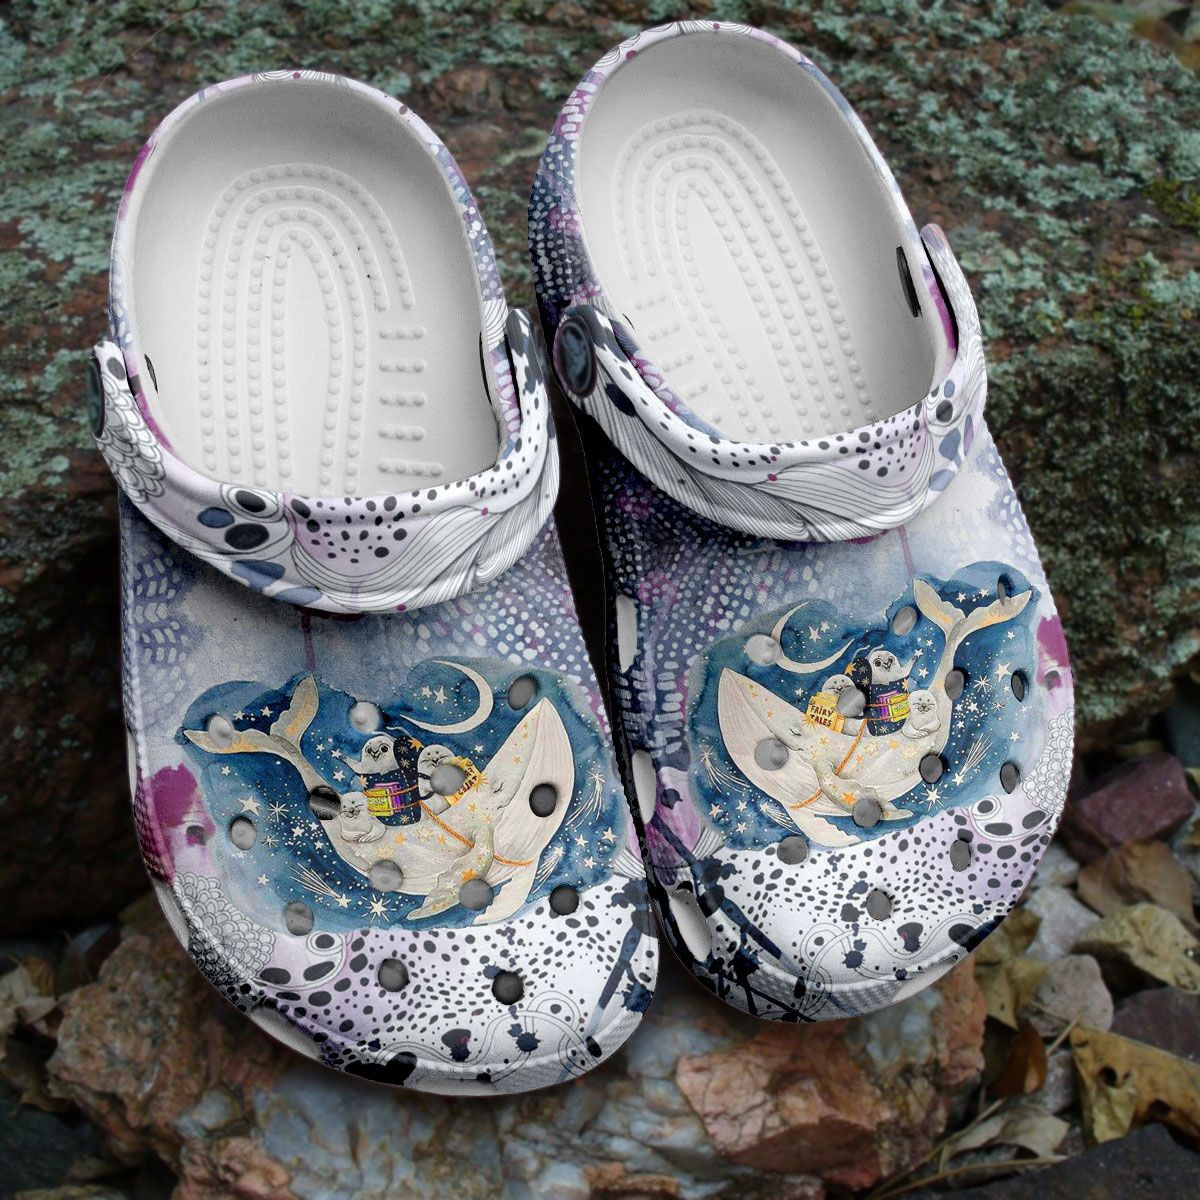 Hippie White Whale With Baby Seal Magic Ocean Crocs Shoes - Funny Cartoon Sea Crocs Shoes Crocbland Clog Birthday Gifts For Girl